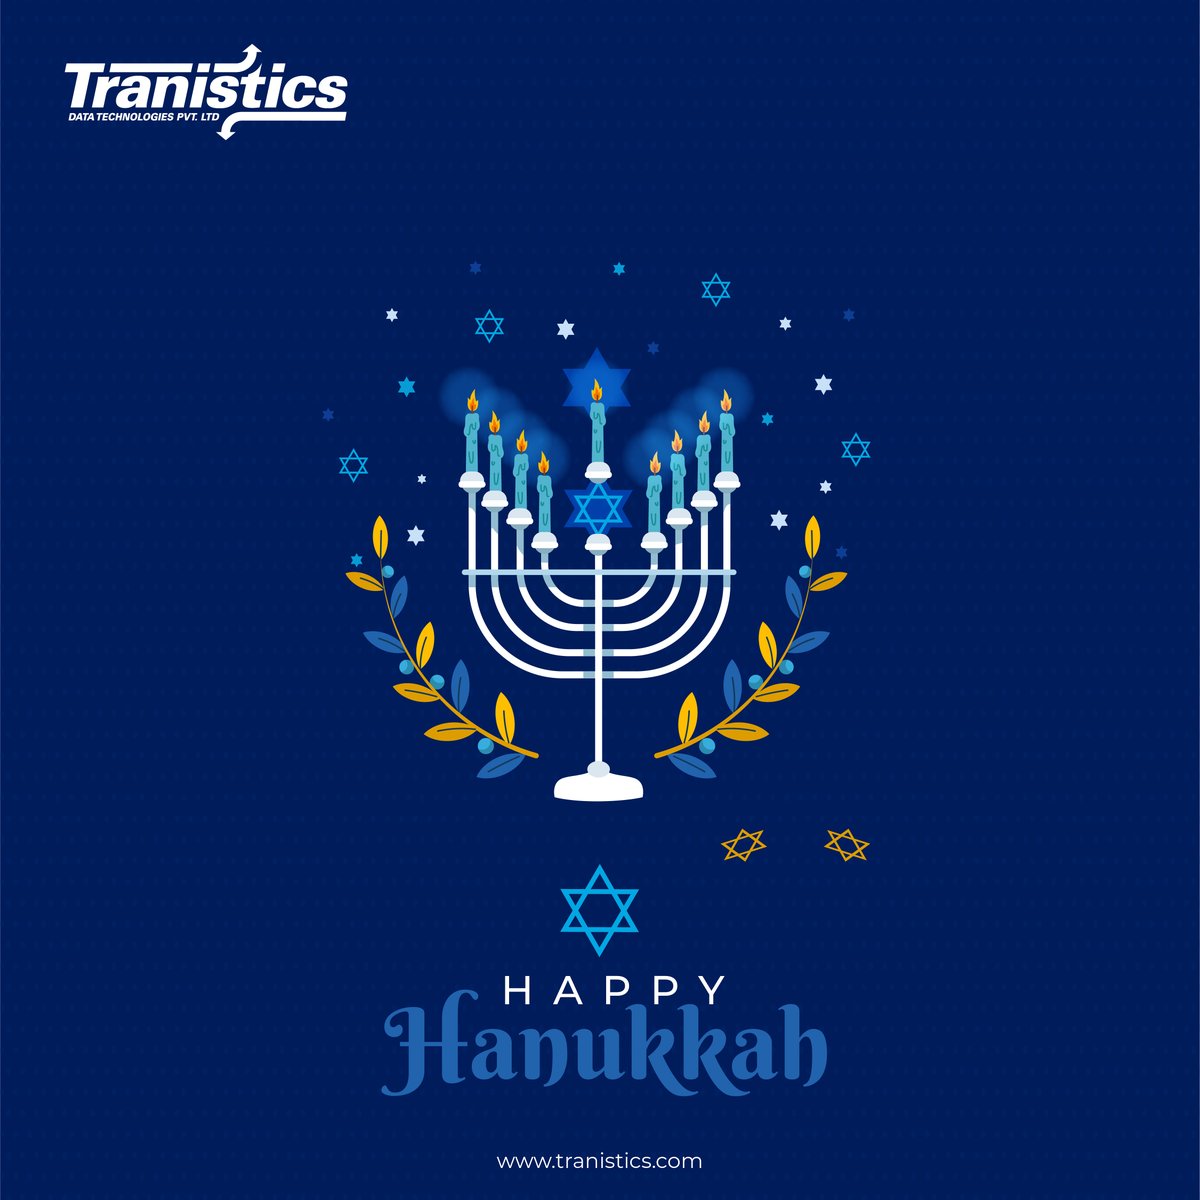 Get ready to light up your nights and celebrate the miracle of Hannukah! Let's make this year's festivities spectacular and full of joy.
 #HappyHannukah #Miracles #Tranistics #trustedbusinesspartner #logistics #publishing